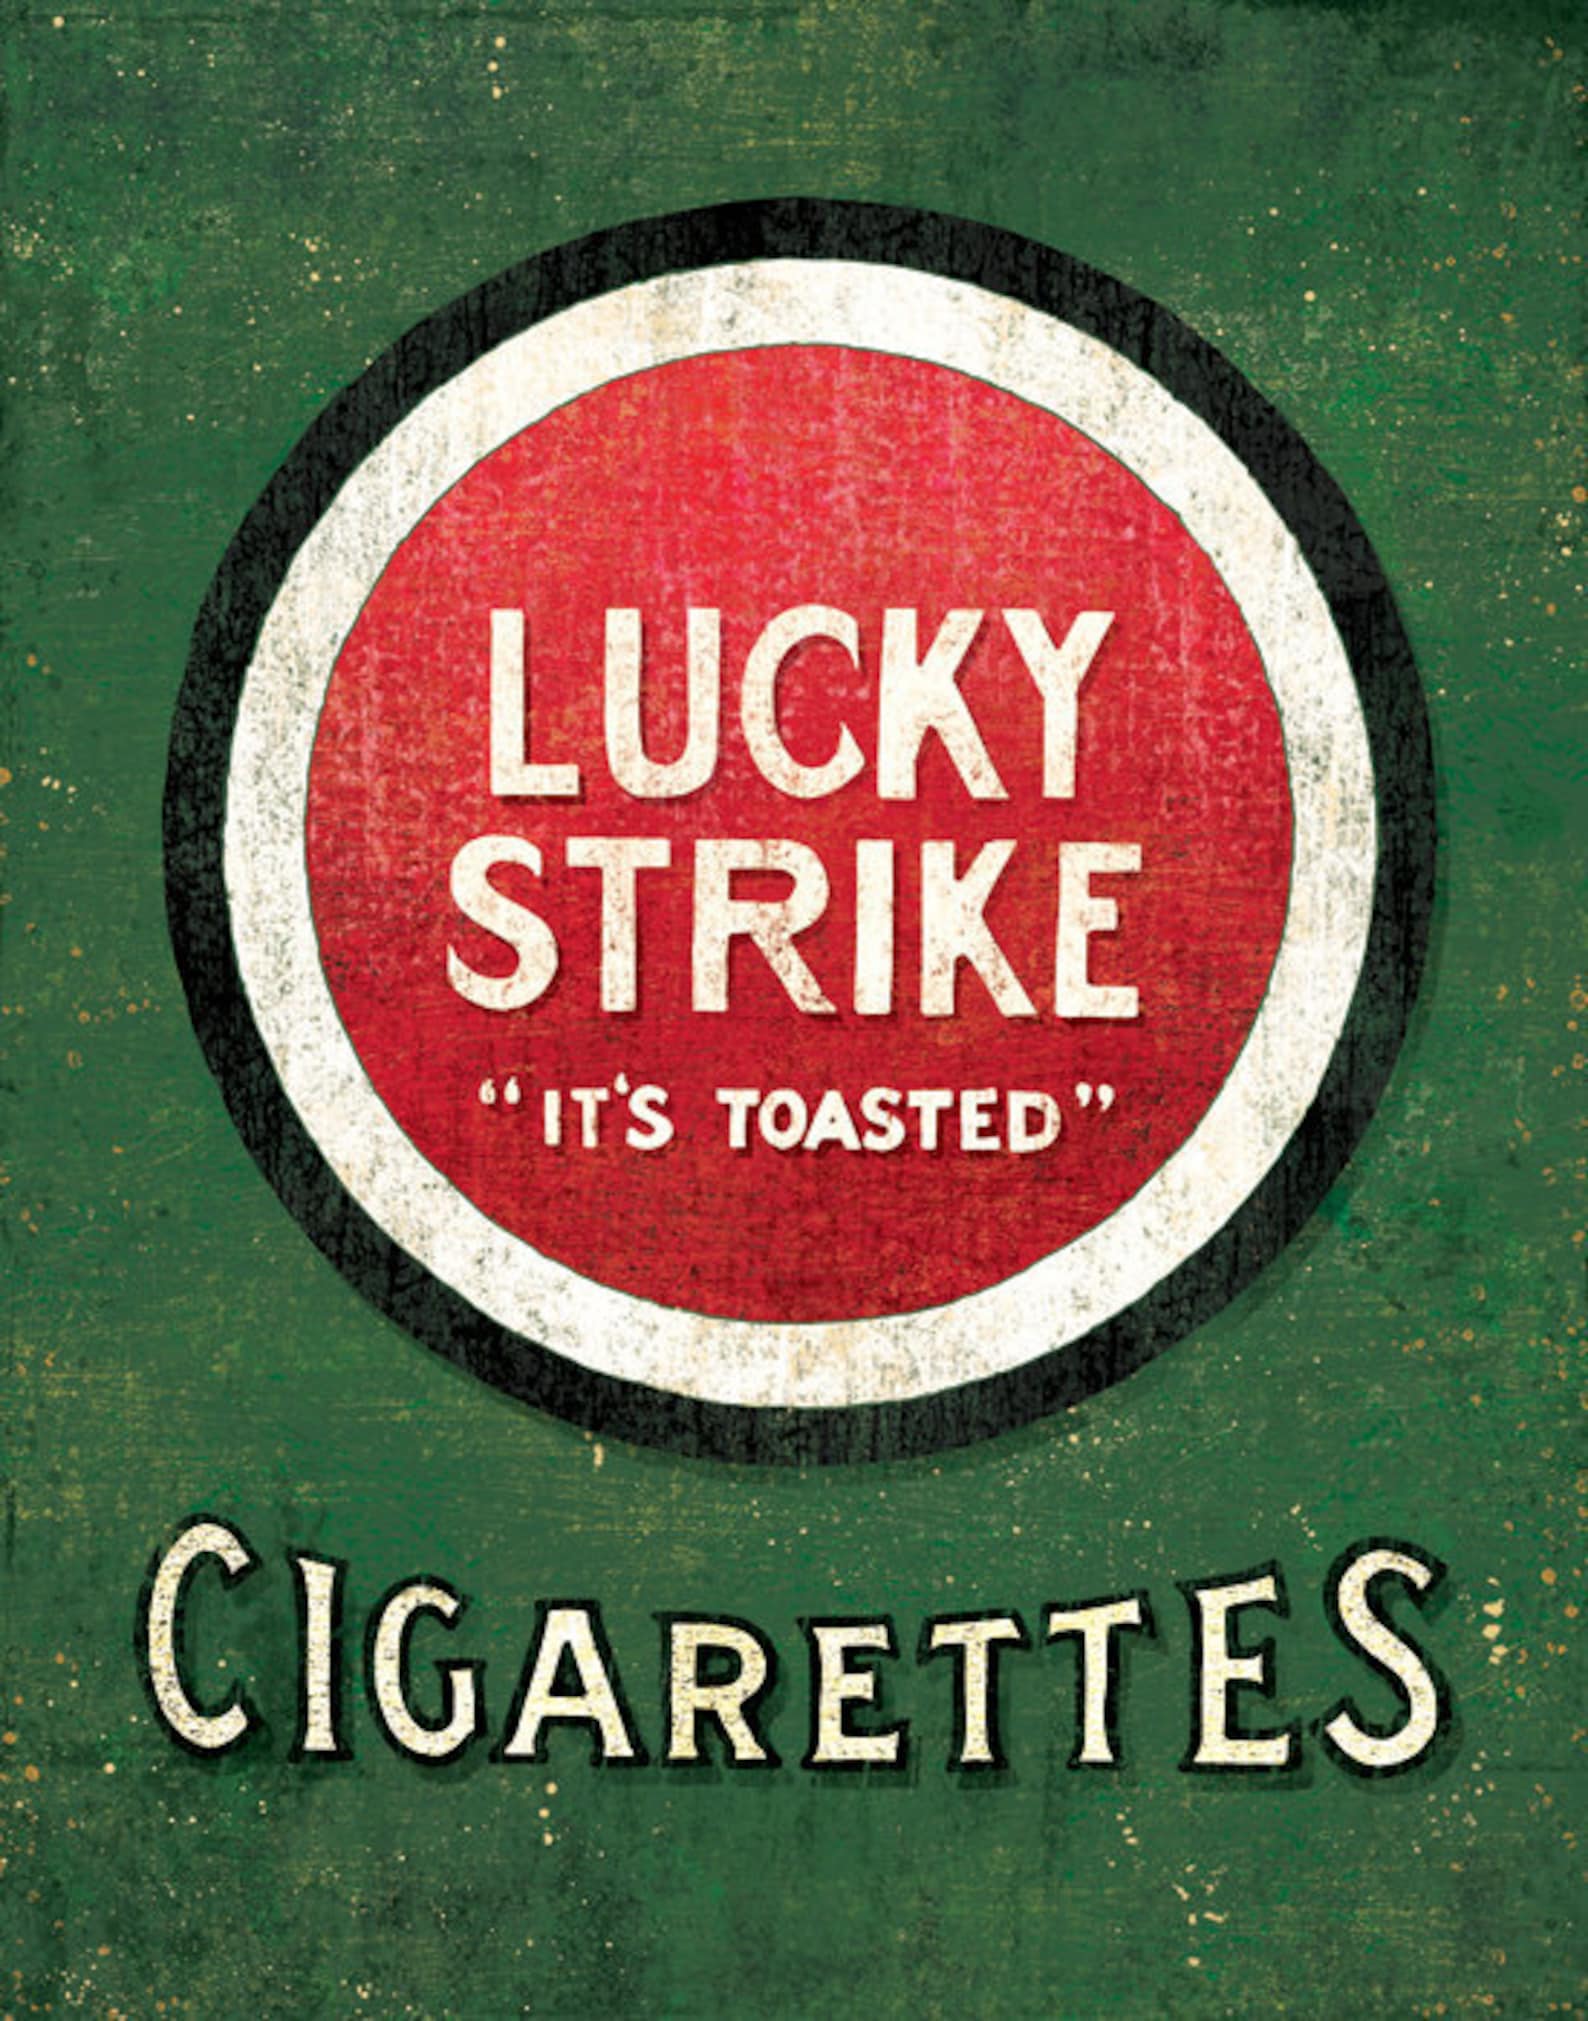 Classic Lucky Strike Sign Painting 12x18 High Quality Art Etsy